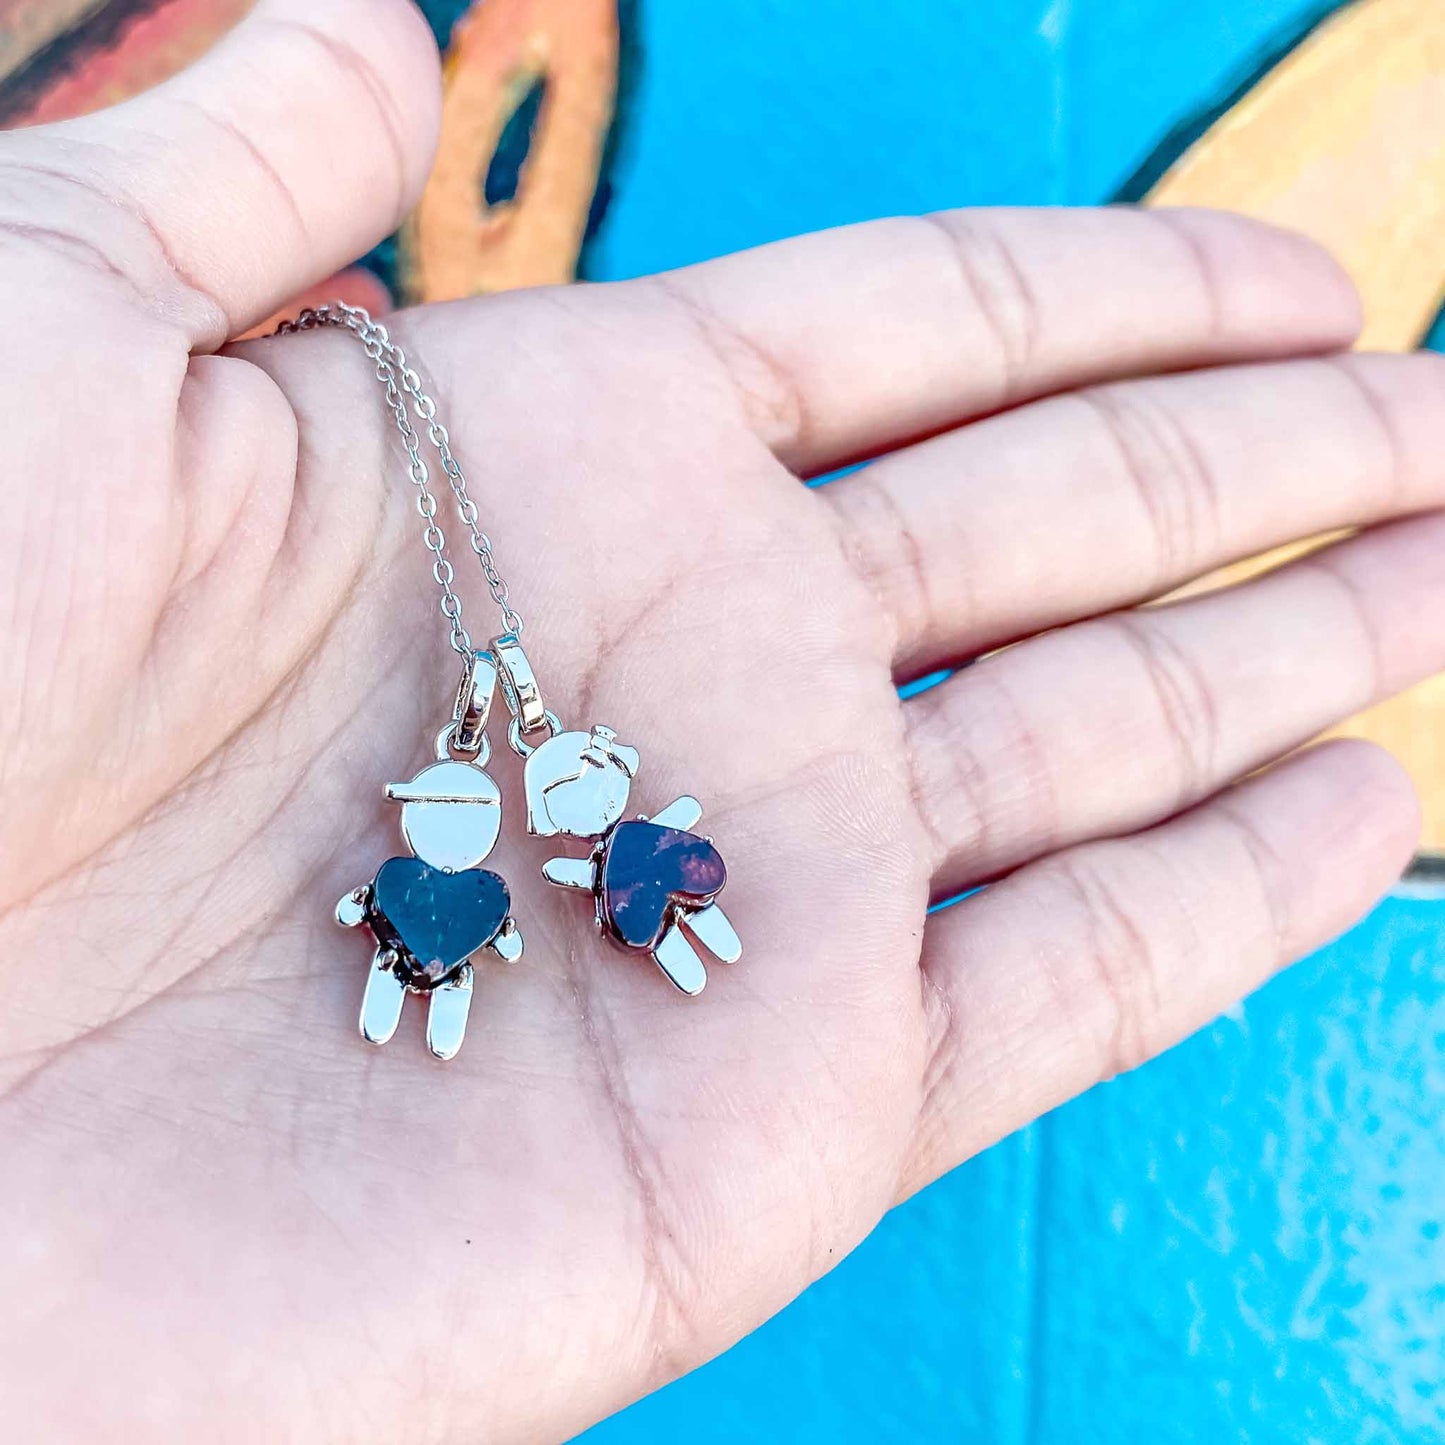 We're donating a $1 of each little girl and little boy pendants to "Pés Livres", which is providing food and education to more than 50 children in Tanzania, Africa.